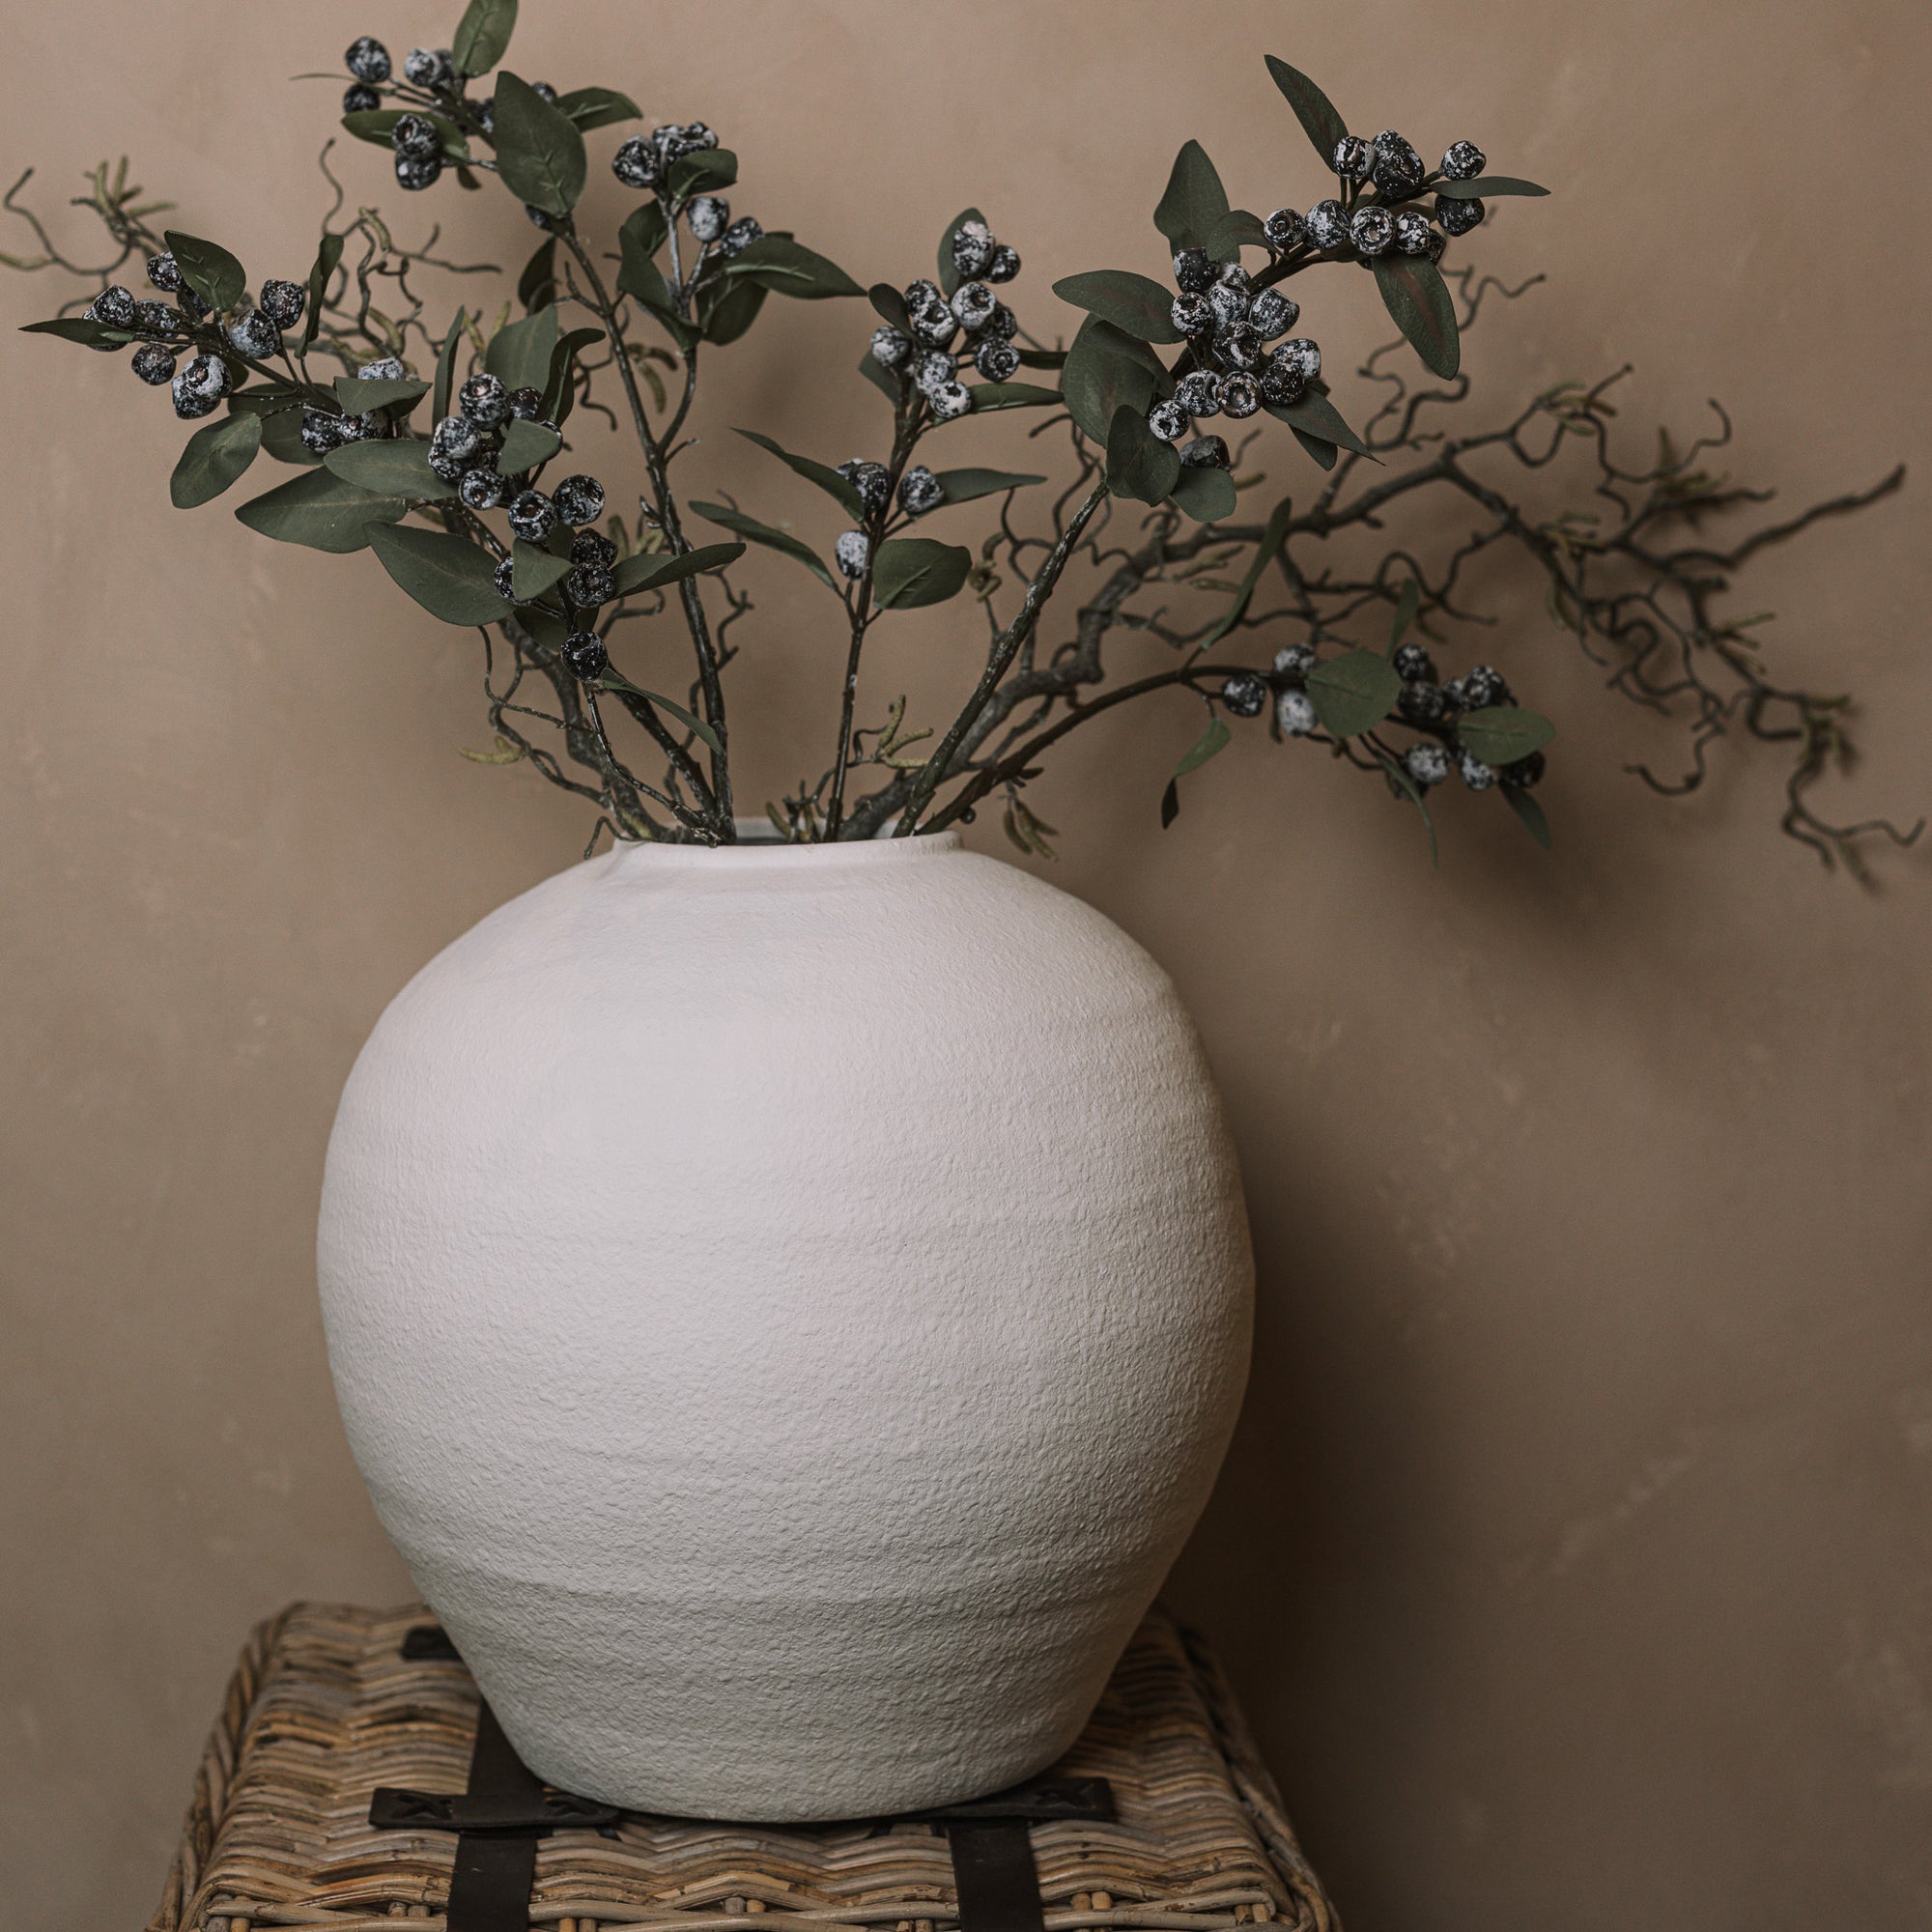 Ceramic round white textured vase with berry sprays and branches.